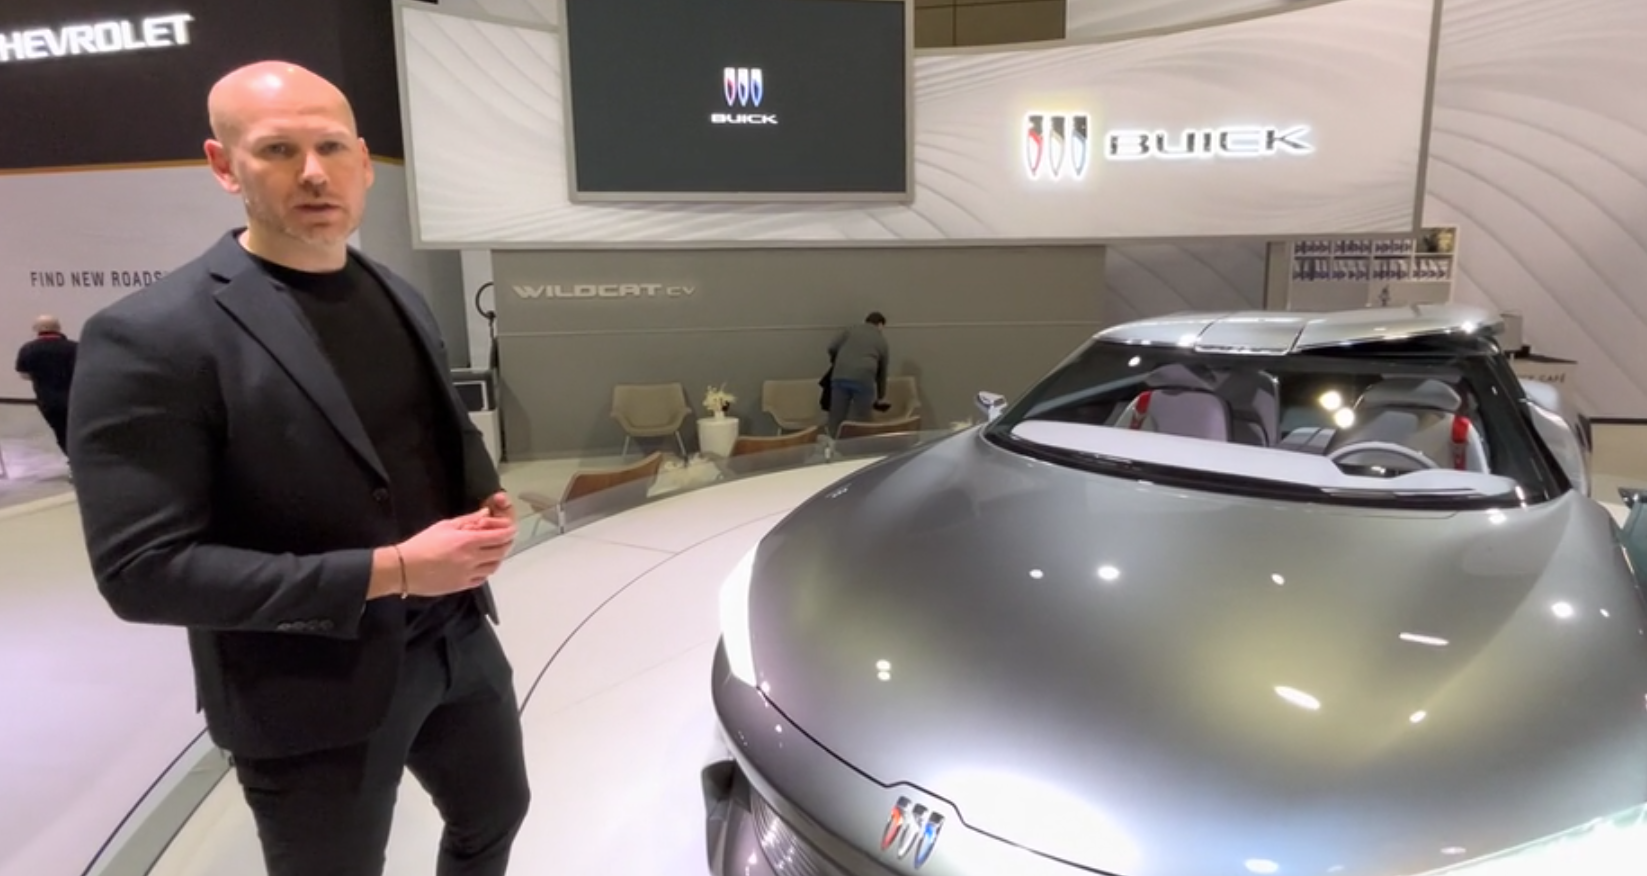 Kevin Nougarede, Buick's design manager, takes a walk around the Buick Wildcat concept at the Canadian International Auto Show in Toronto